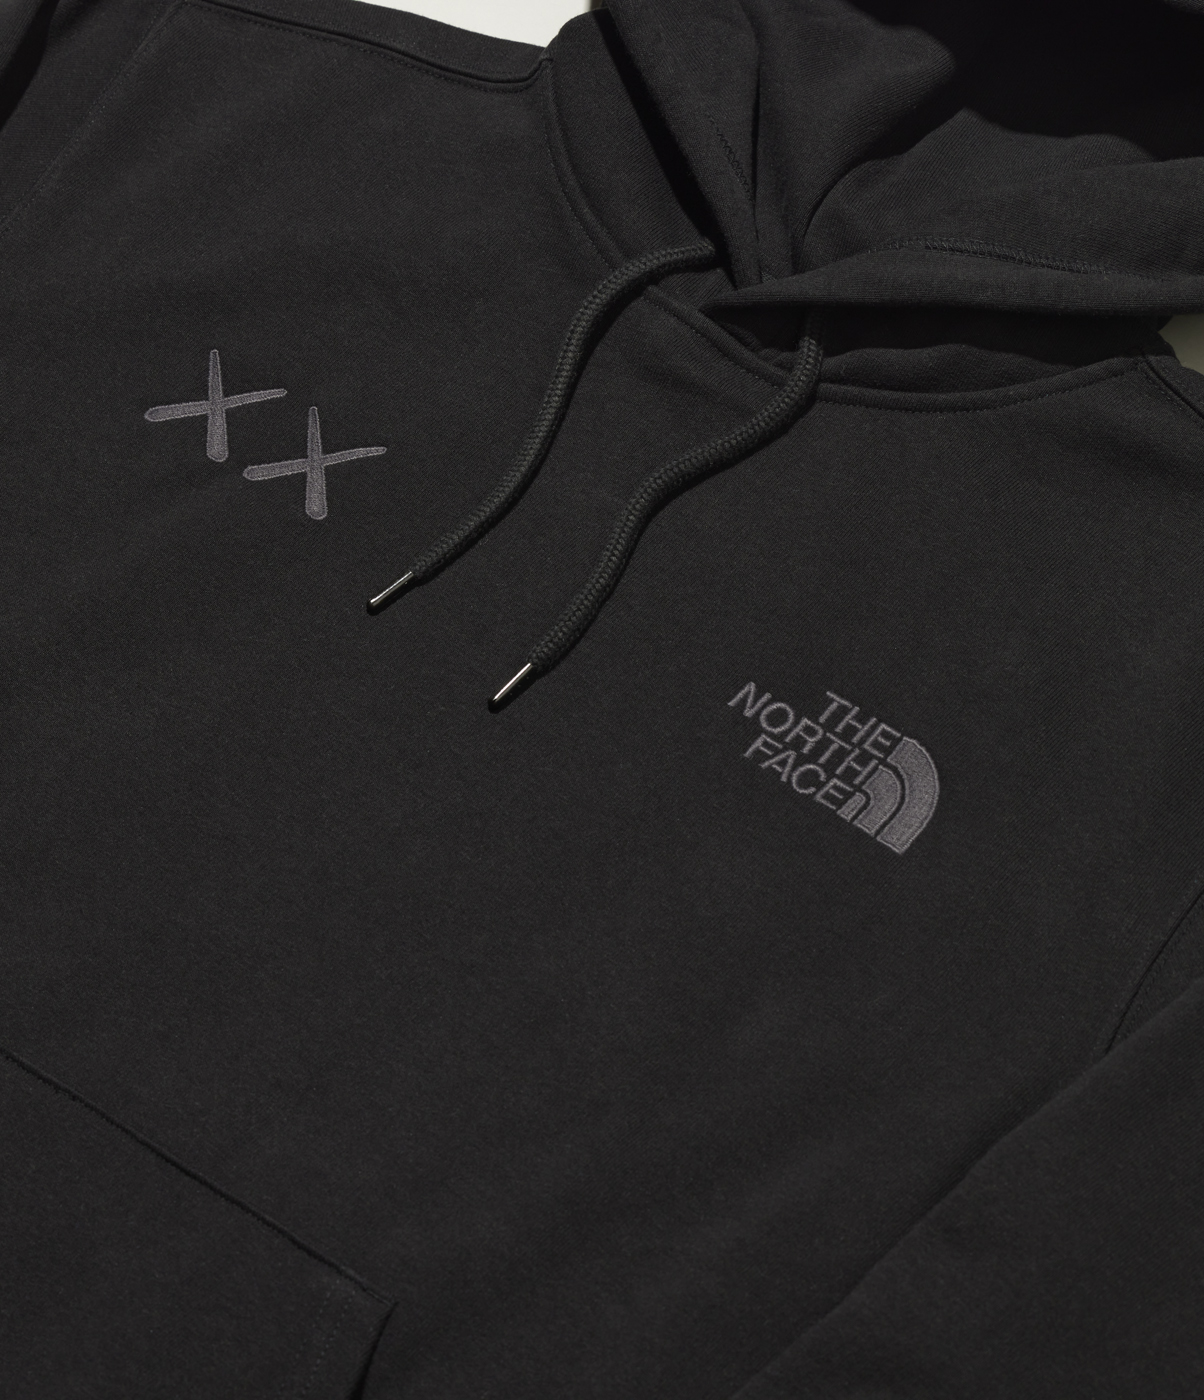 KAWS x The North Face Take Centre Stage In PresentedBy's Latest Drop